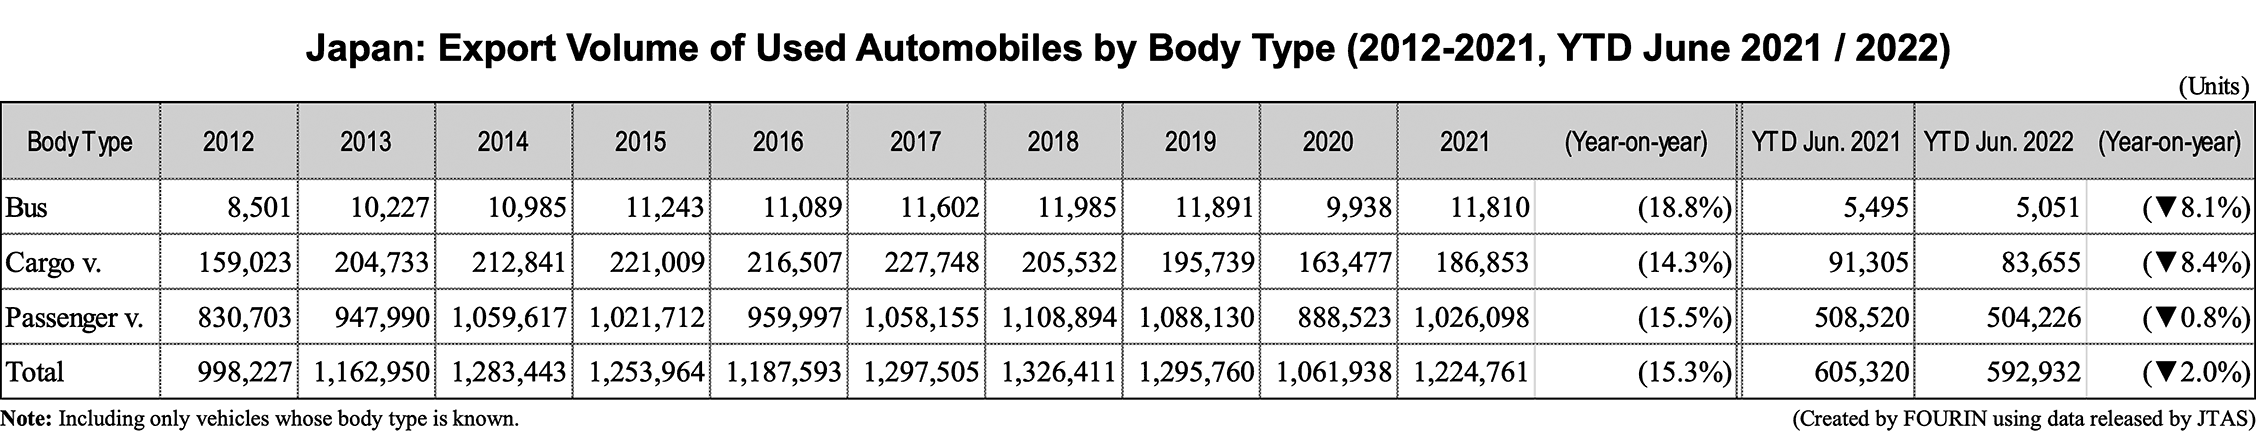 Table data: Japan: Export Volume of Used Automobiles by Body Type (2012-2021, YTD June 2021 / 2022)